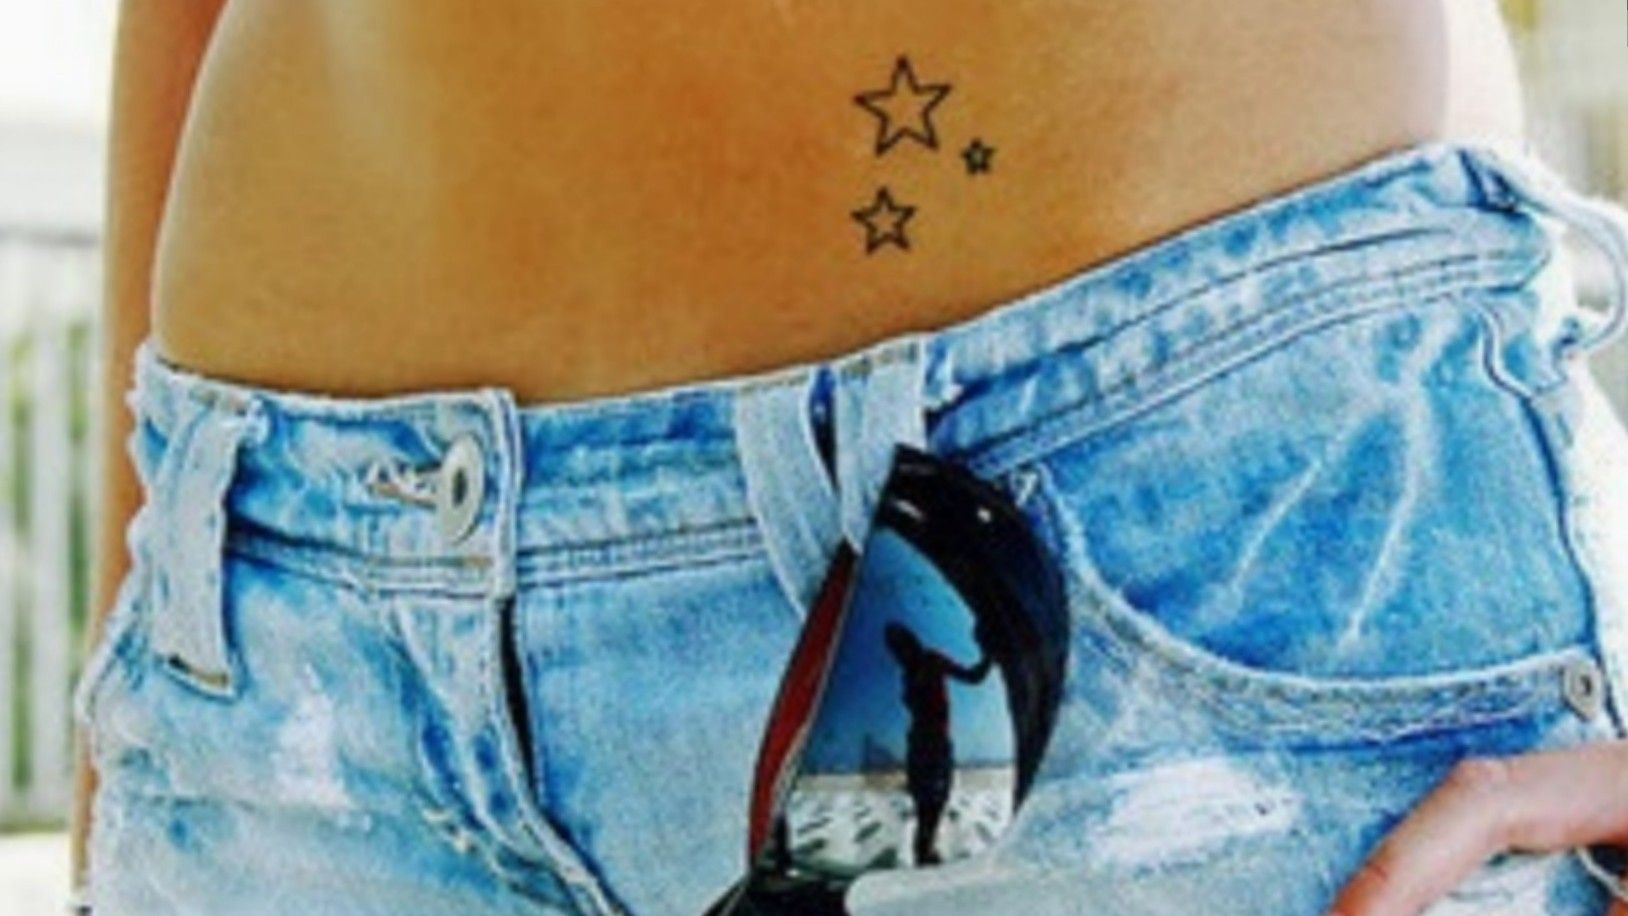 Colorful hip star tattoo with swirls